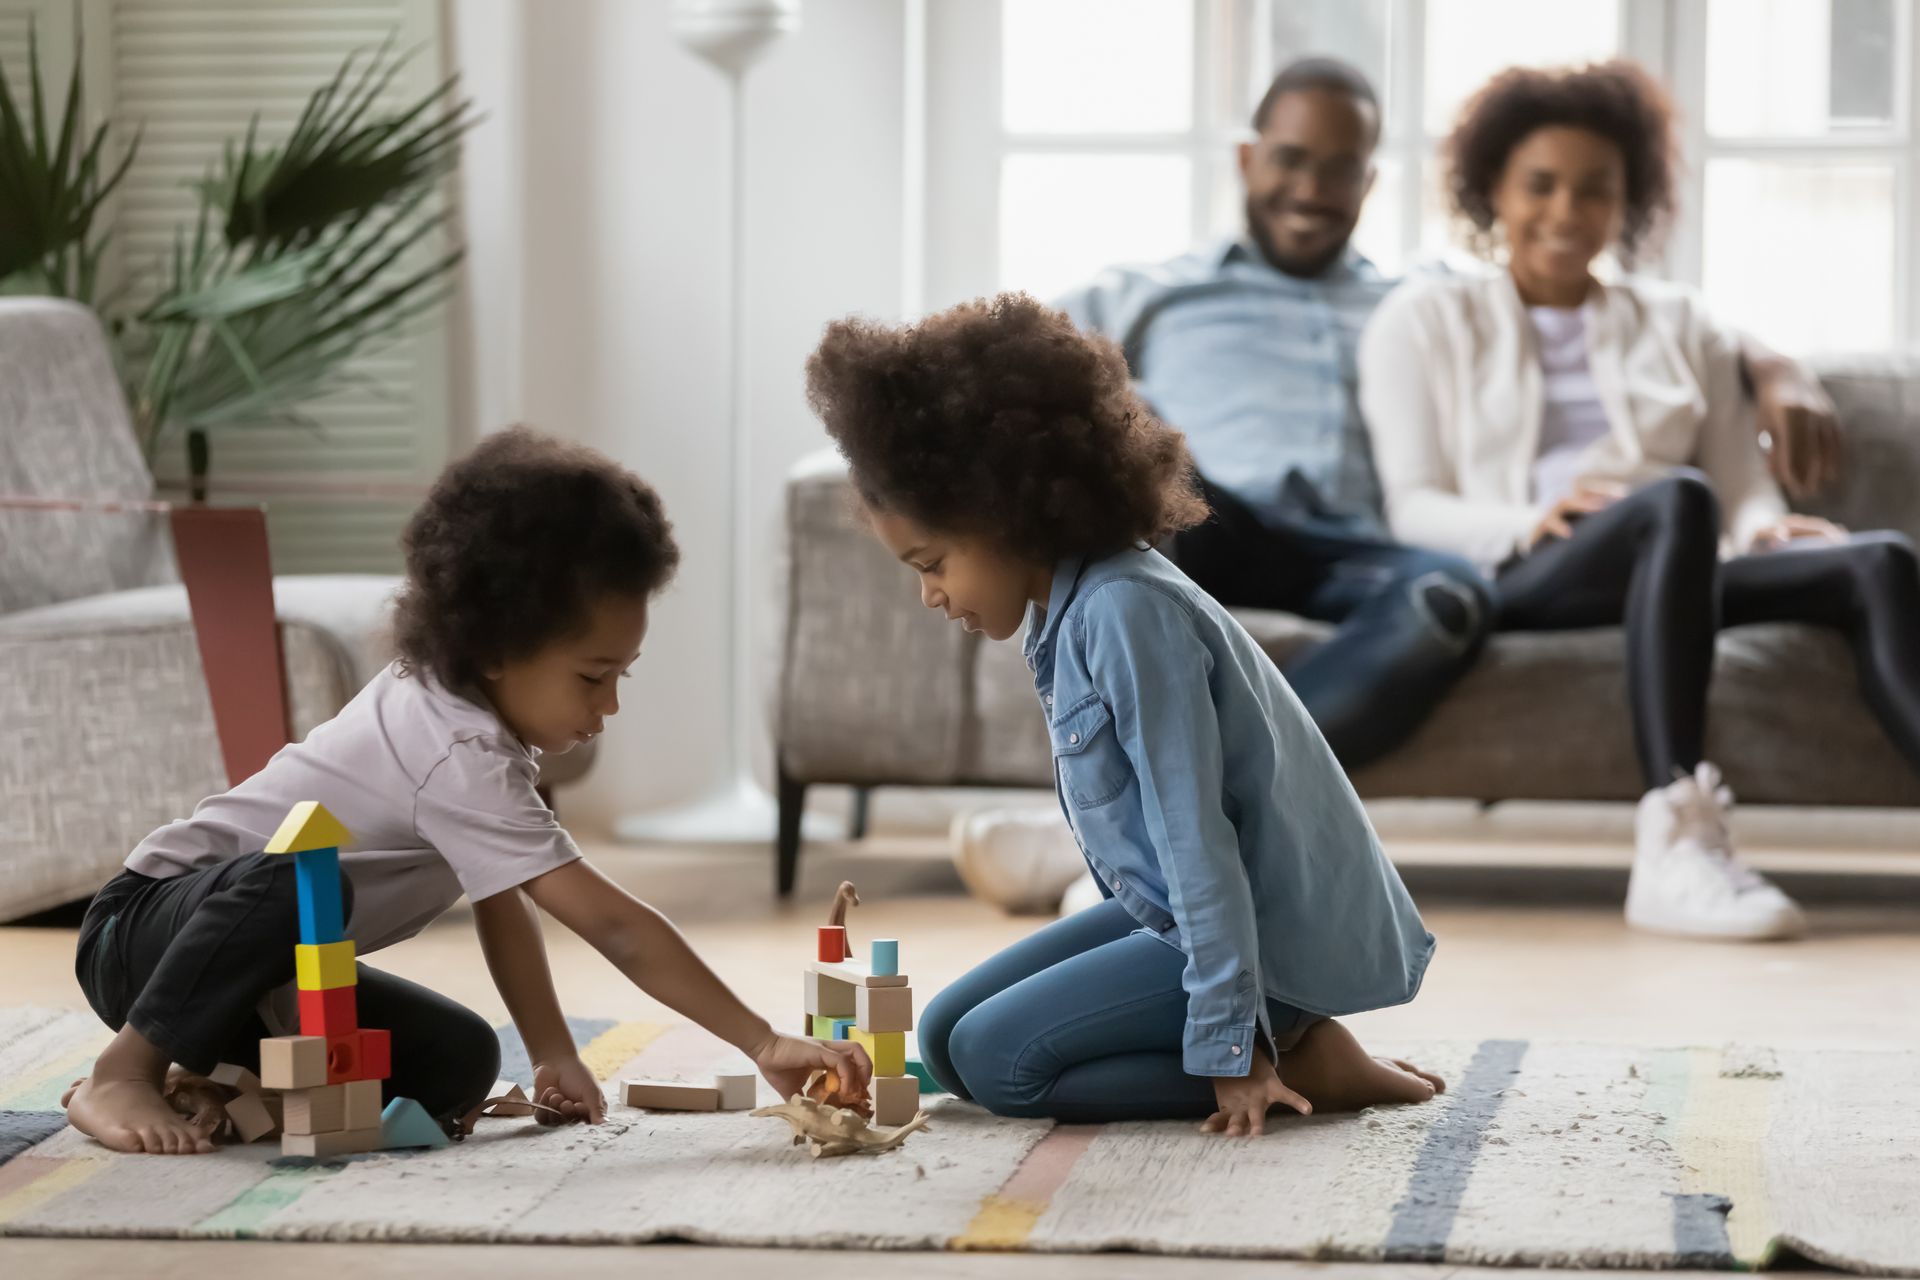 The children play with their parents sitting on the couch in the back discussing the differences between self-insured and fully-insured plans for their family